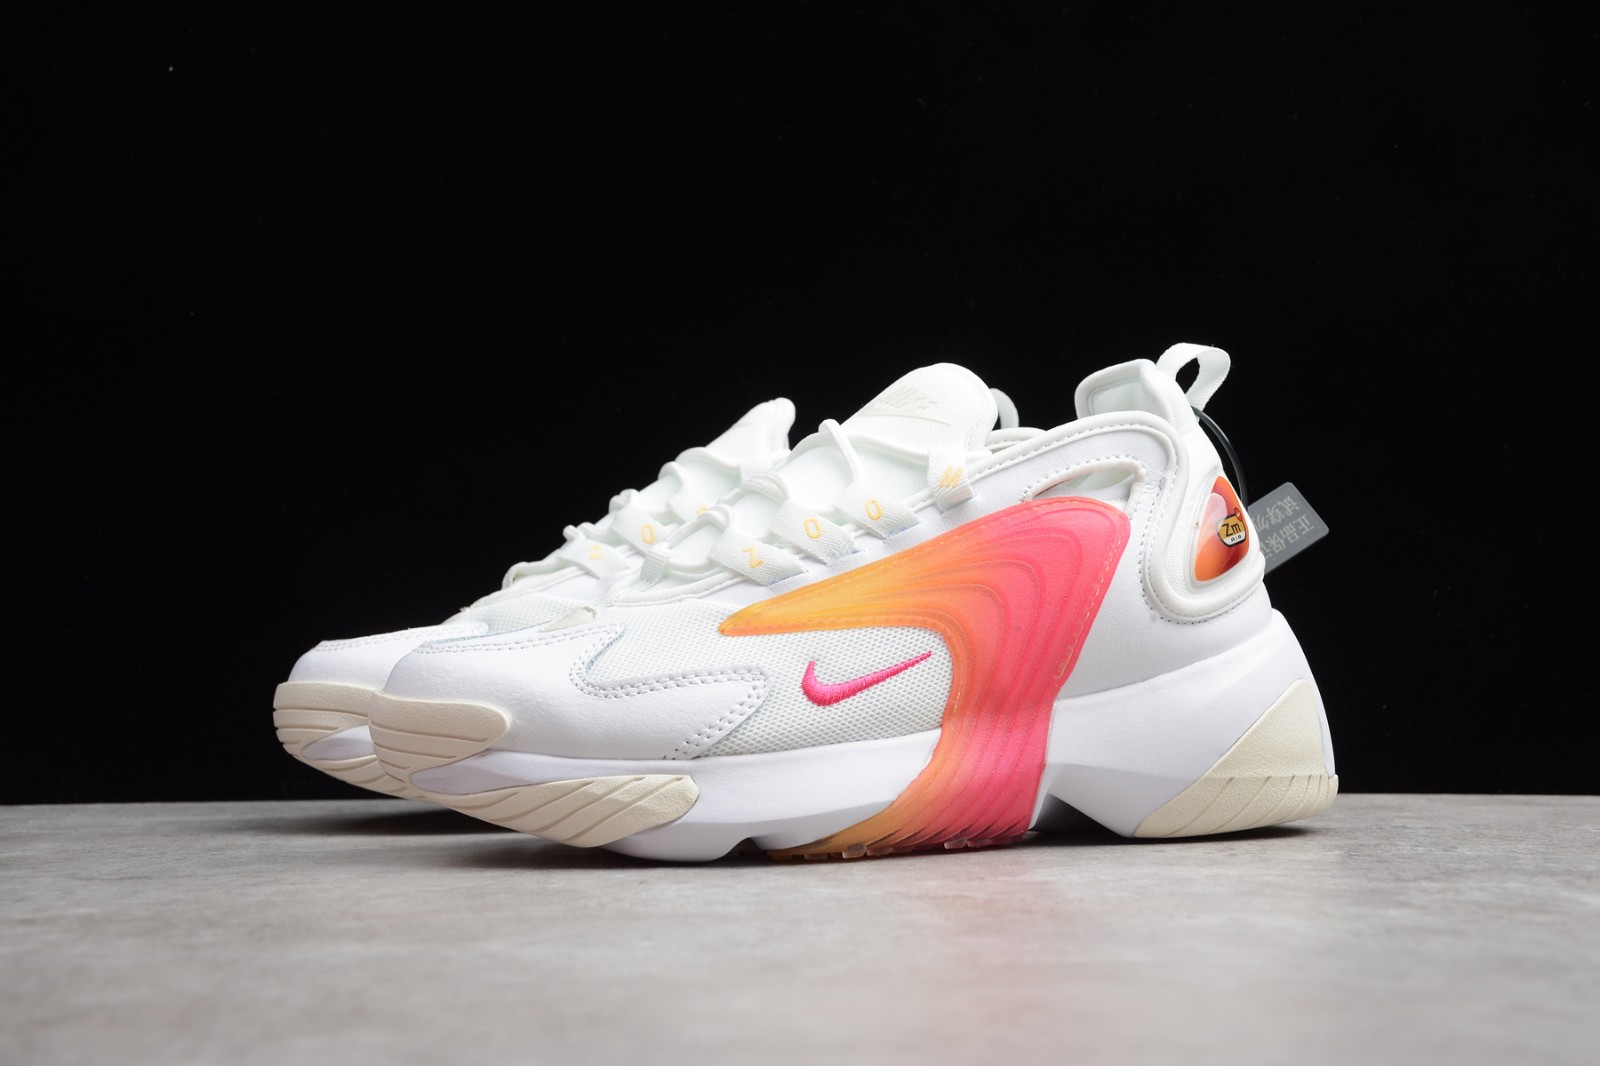 enthousiasme Overvloedig erven MultiscaleconsultingShops - 1023 - Nike Zoom 2K Womens White Rush Pink  AO0354 - dolphin nike air penny 5 shoes black and pink